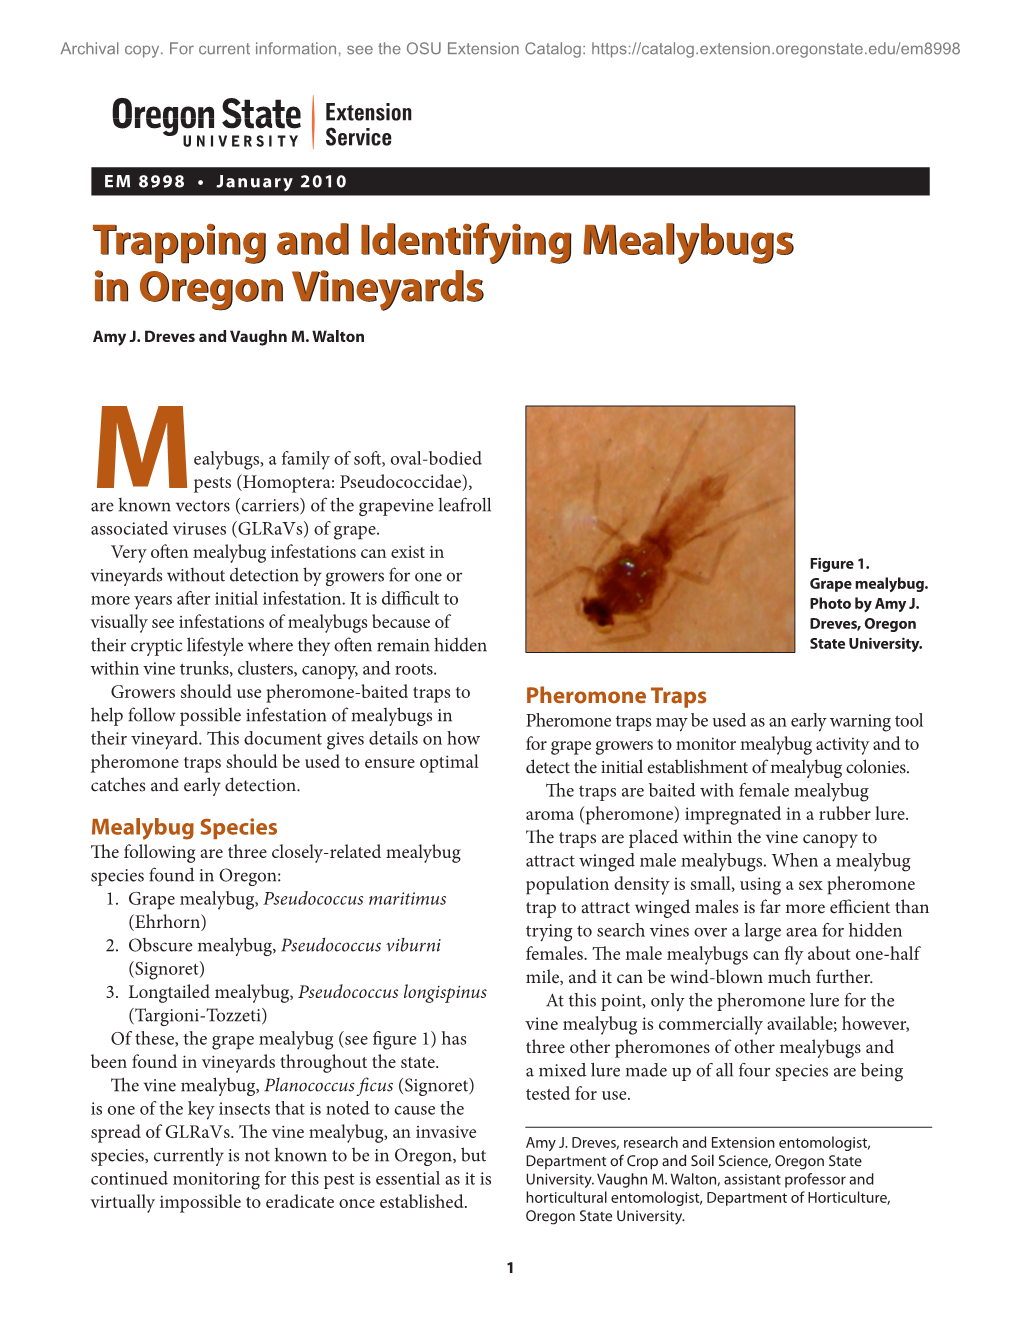 Trapping and Identifying Mealybugs in Oregon Vineyards